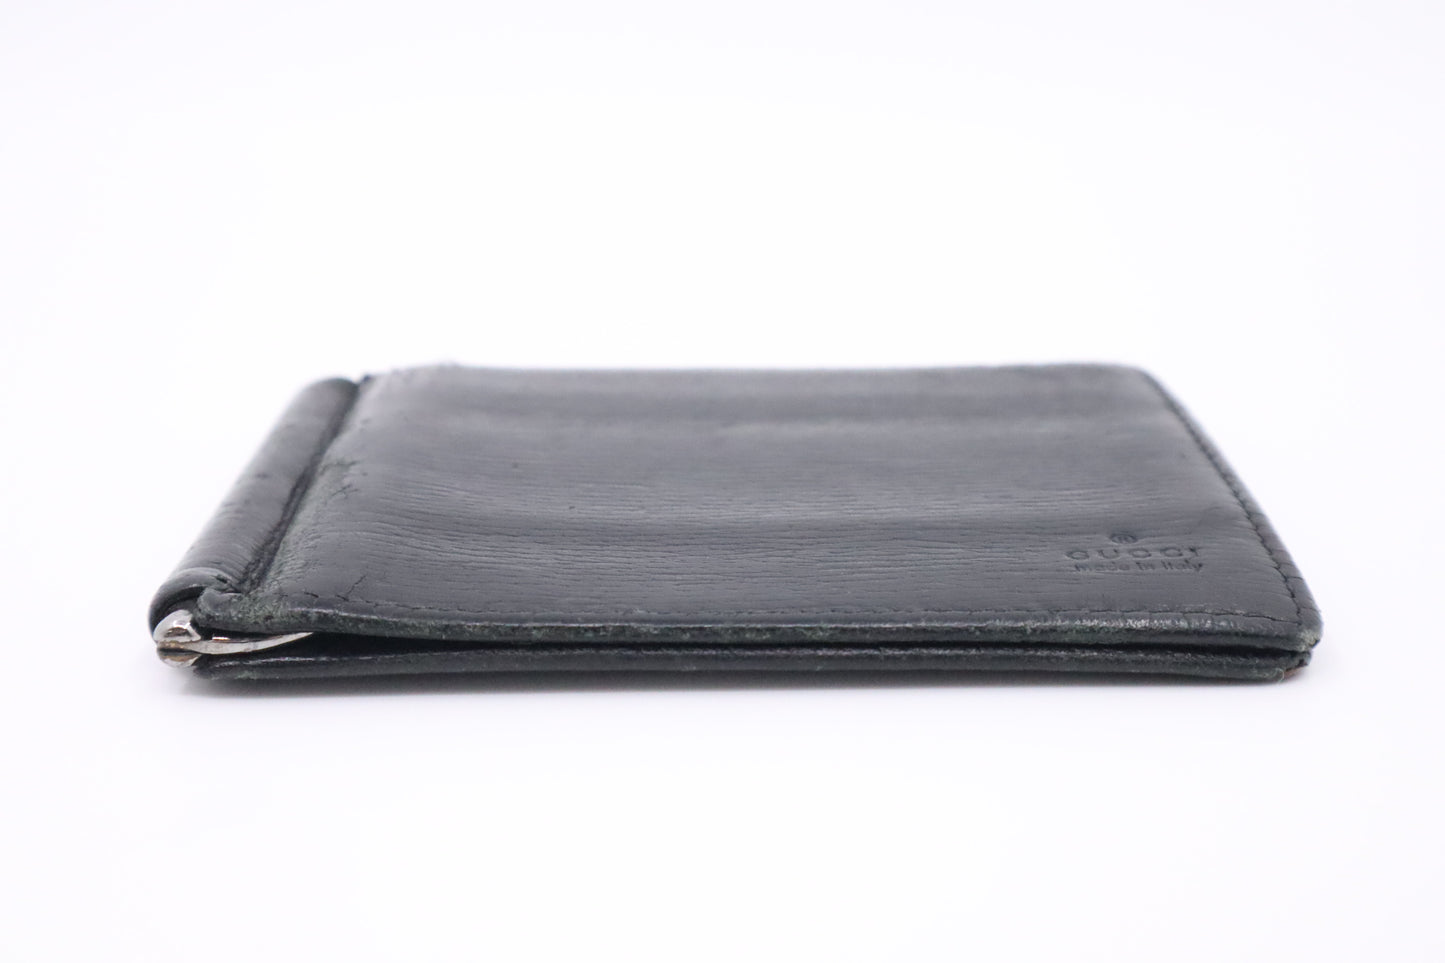 Gucci Bifold Wallet in Black Leather